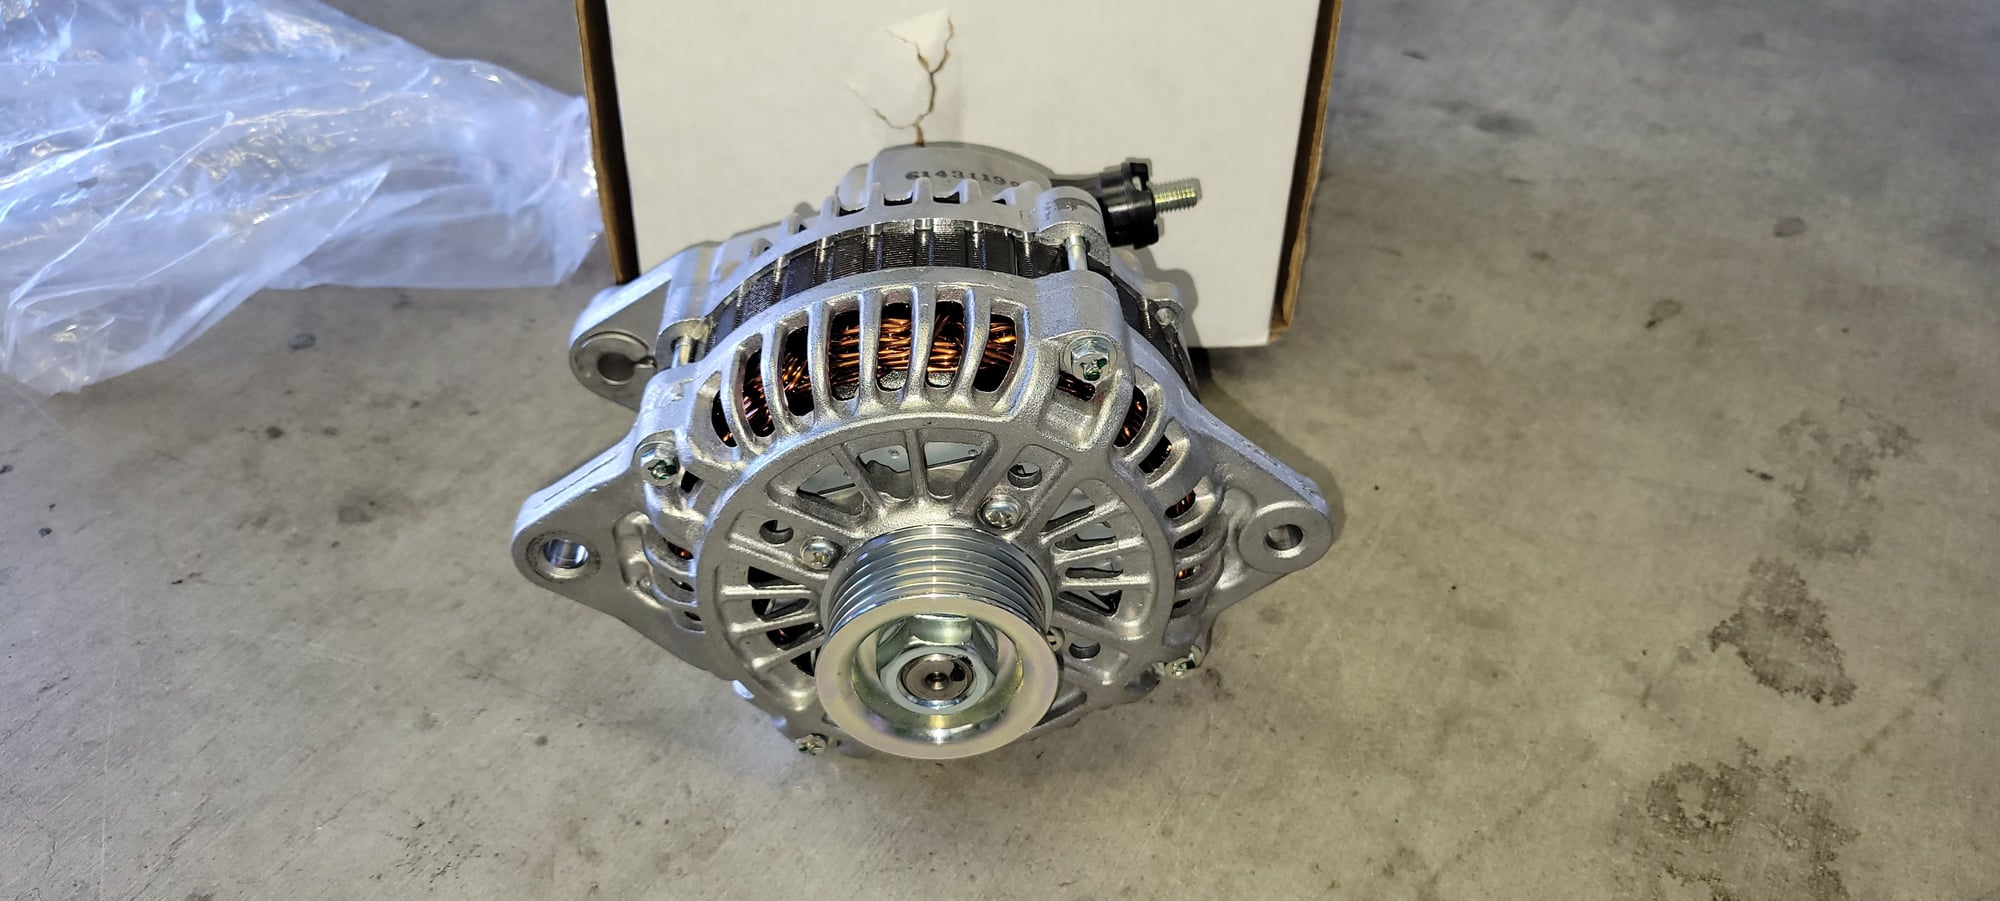 Miscellaneous - Reman Alternator (never used) - Used - 1993 to 1994 Mazda RX-7 - Gilbert, AZ 85297, United States